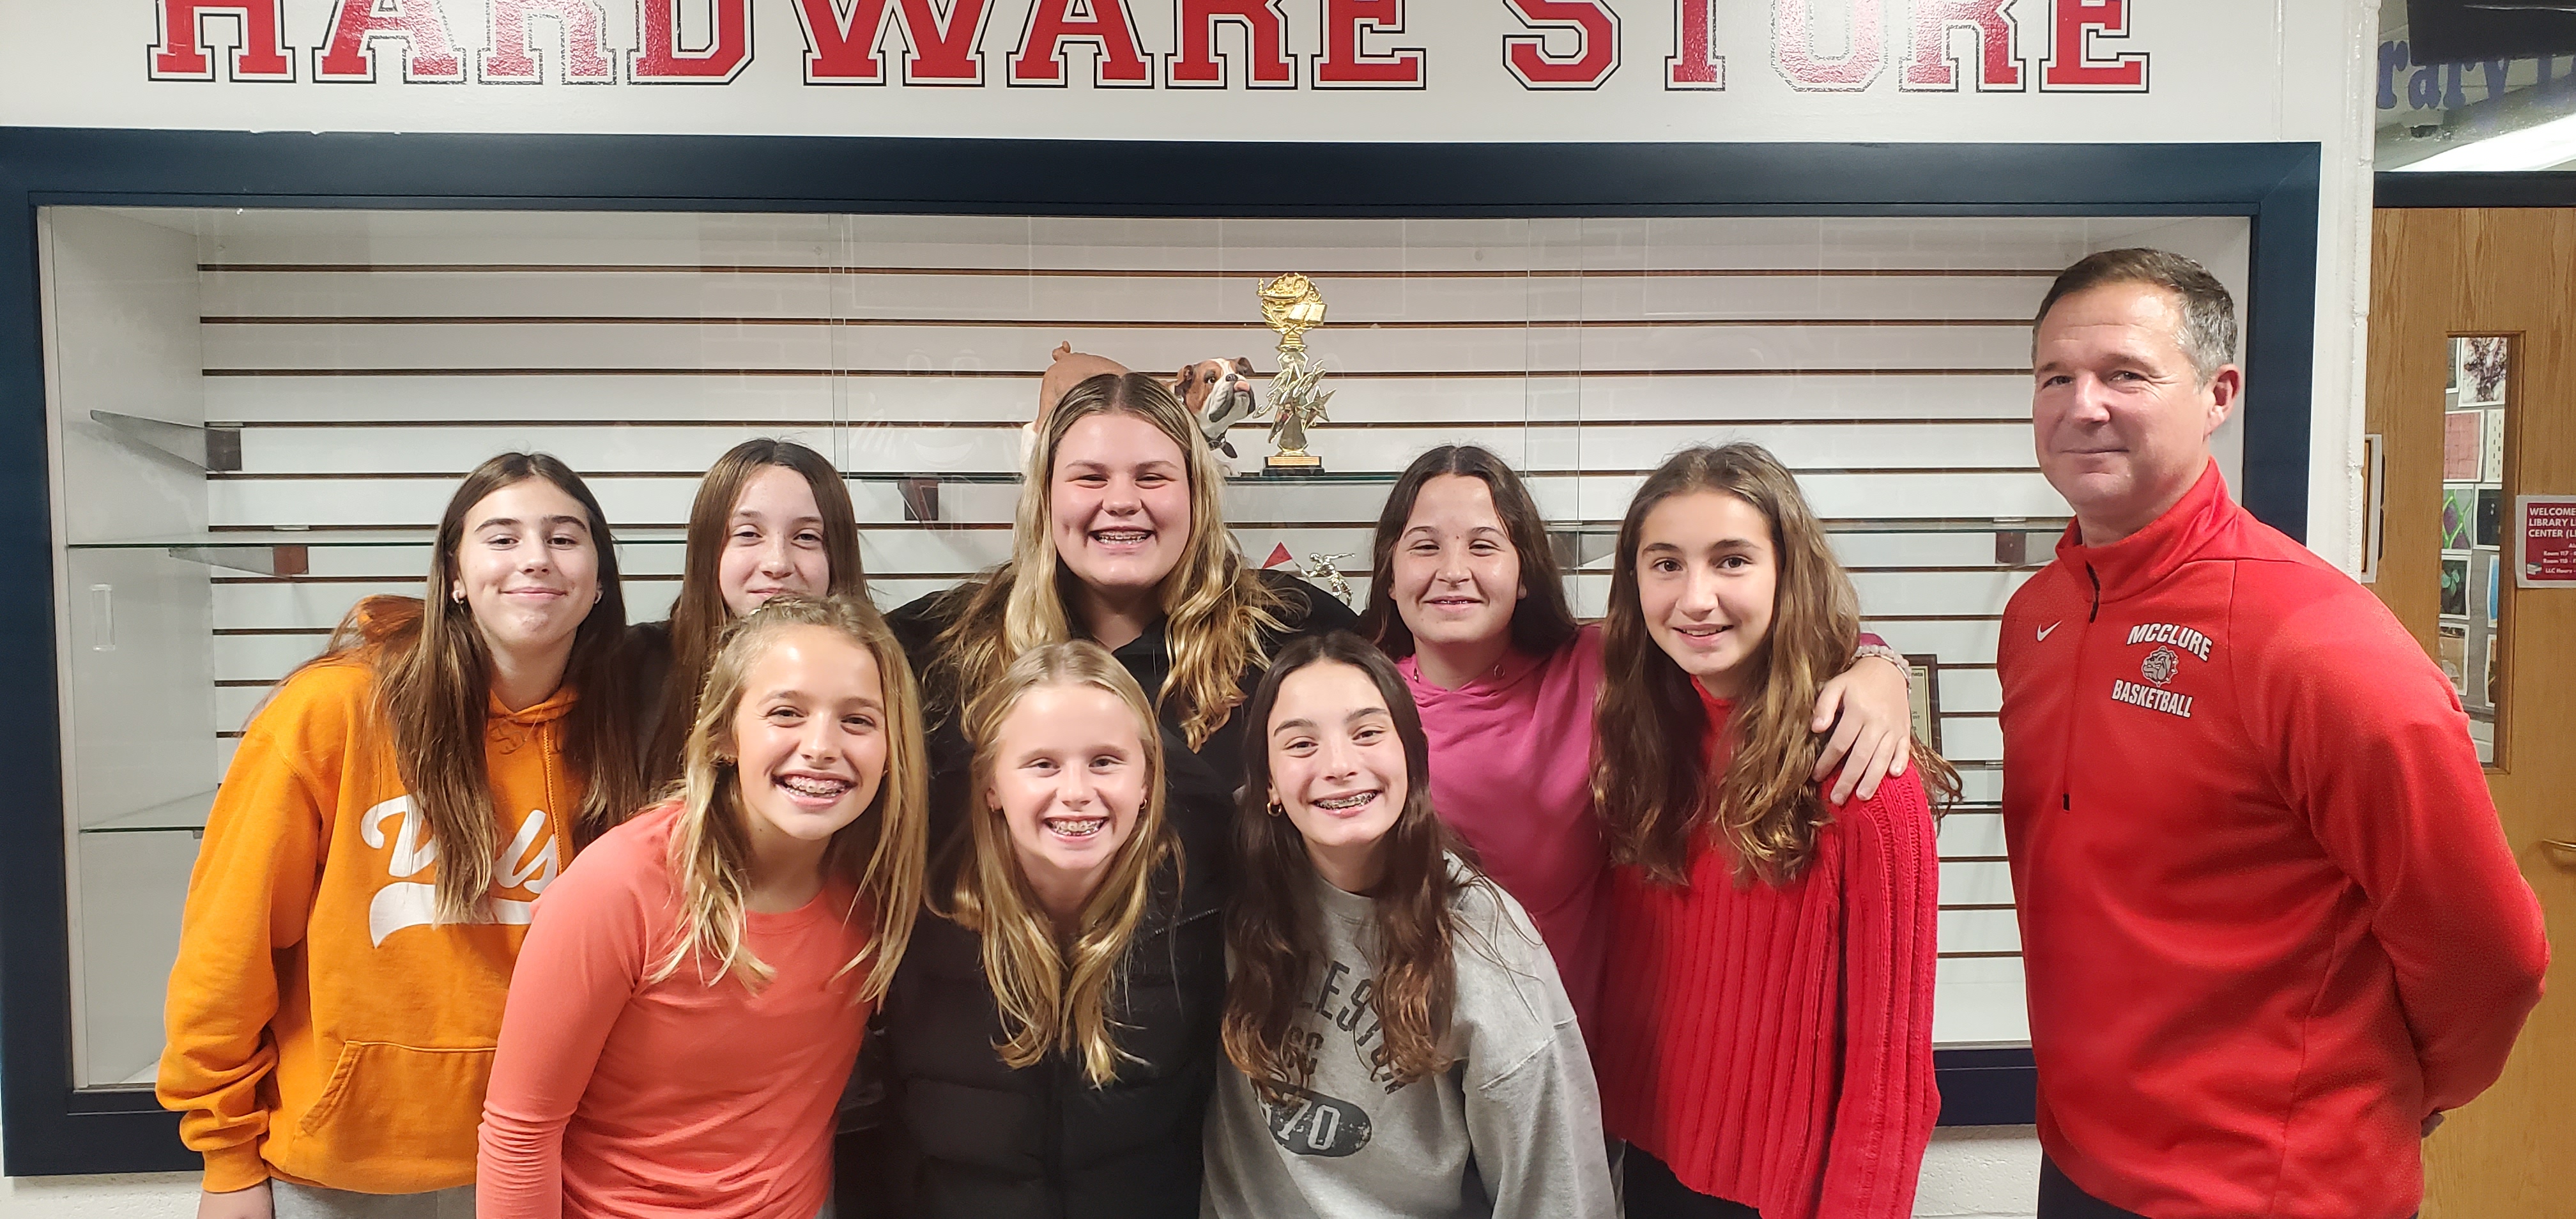 Seventh grade girls basketball team recognized at Board of Education meeting